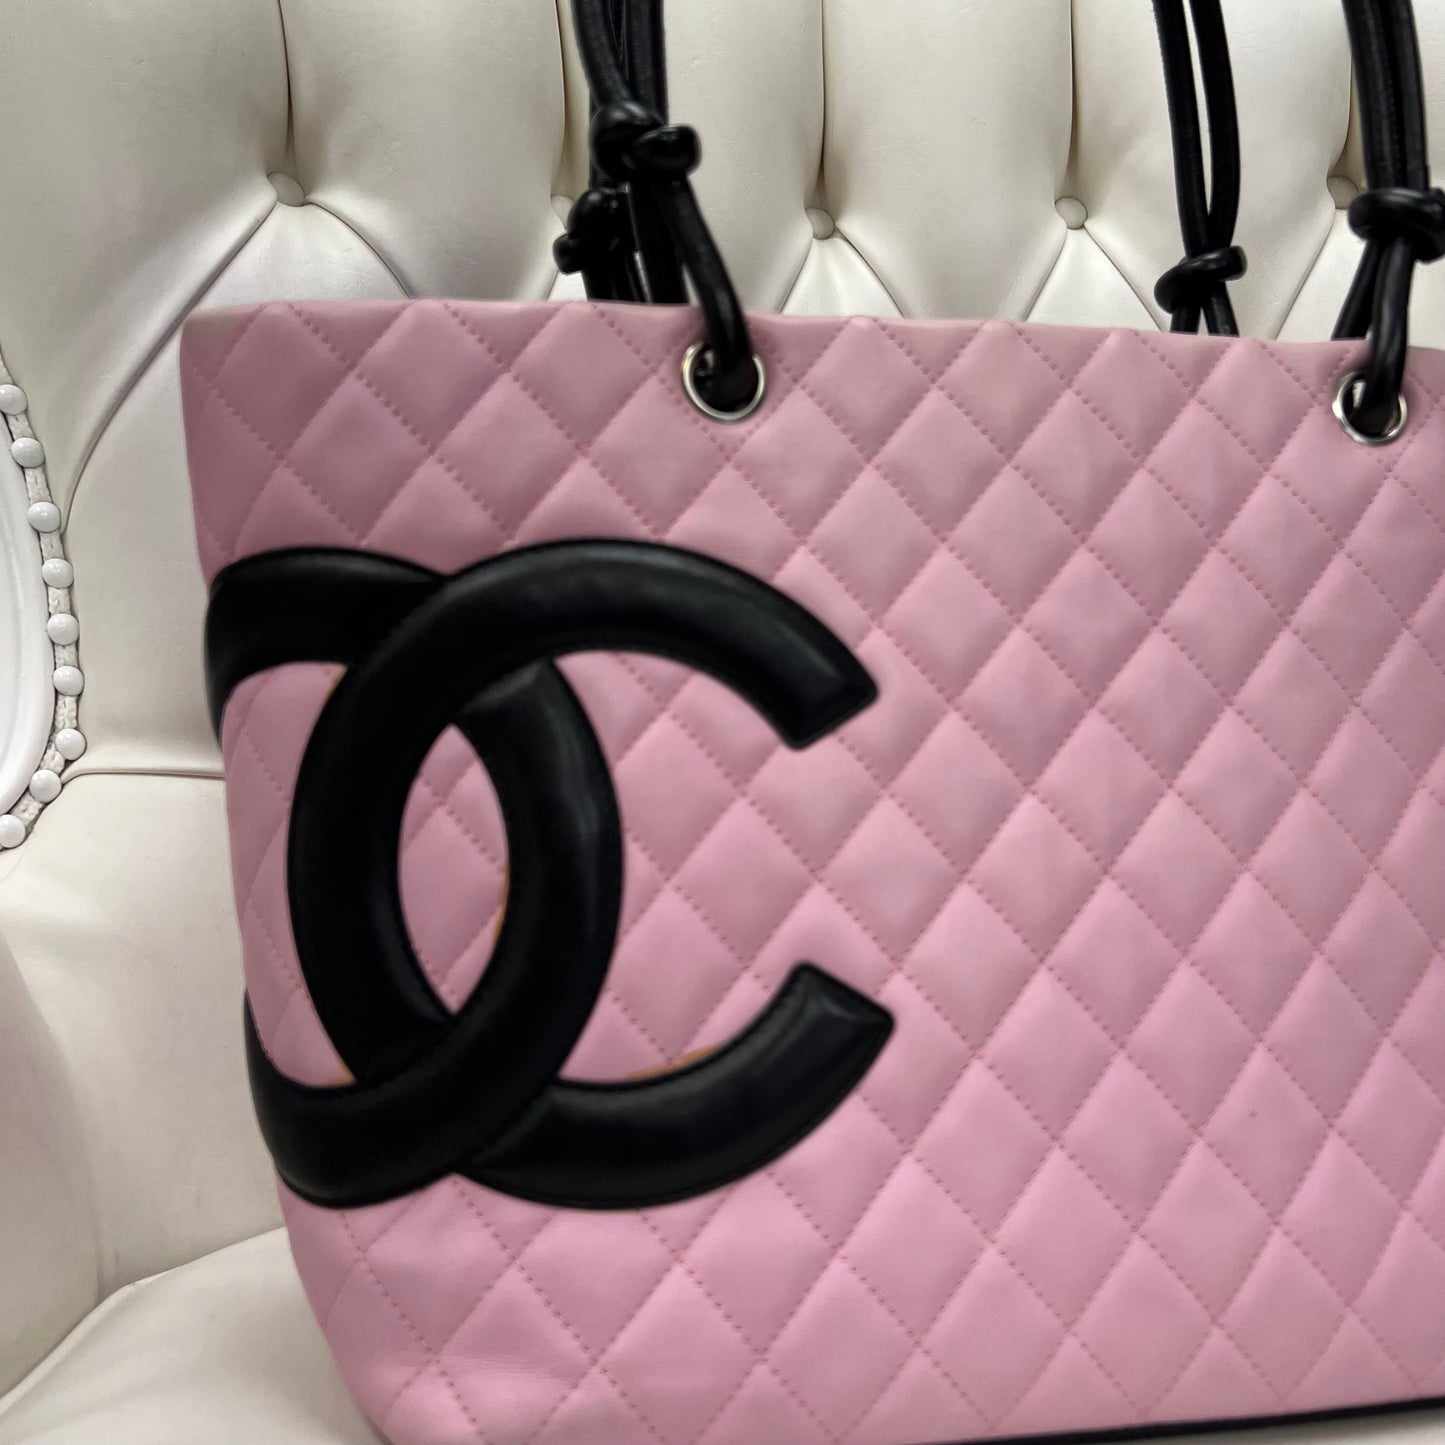 Chanel Cambon Tote Pink